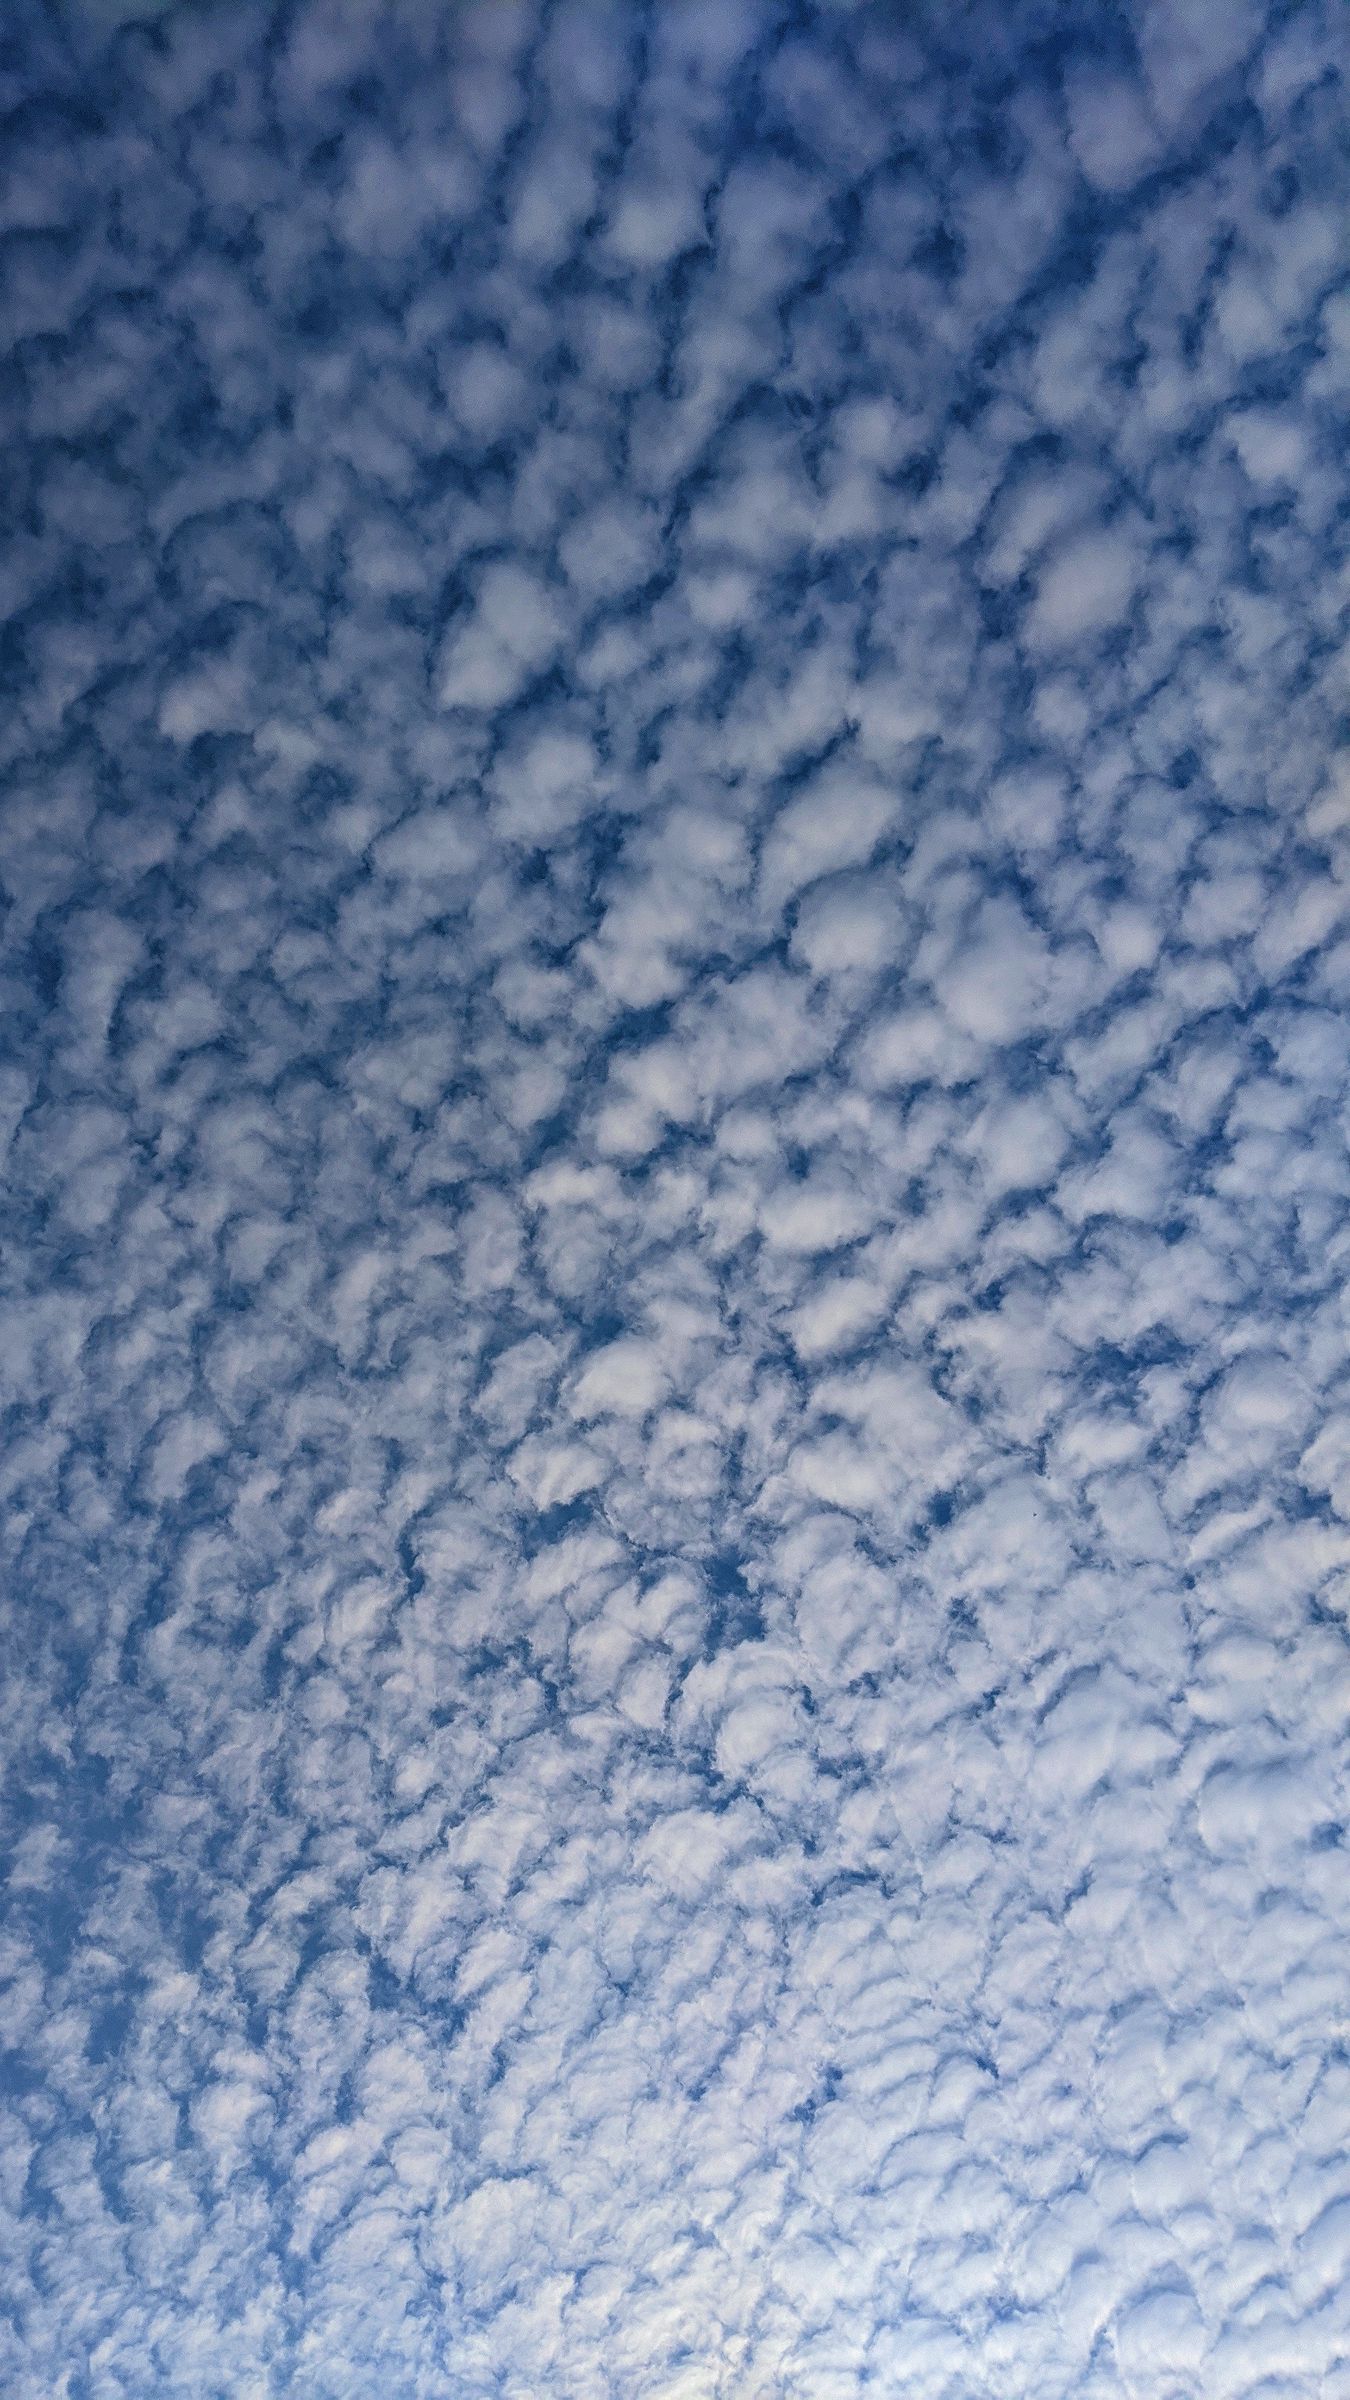 Download wallpaper 1350x2400 cirrus clouds, sky, clouds iphone 8+/7+/6s ...